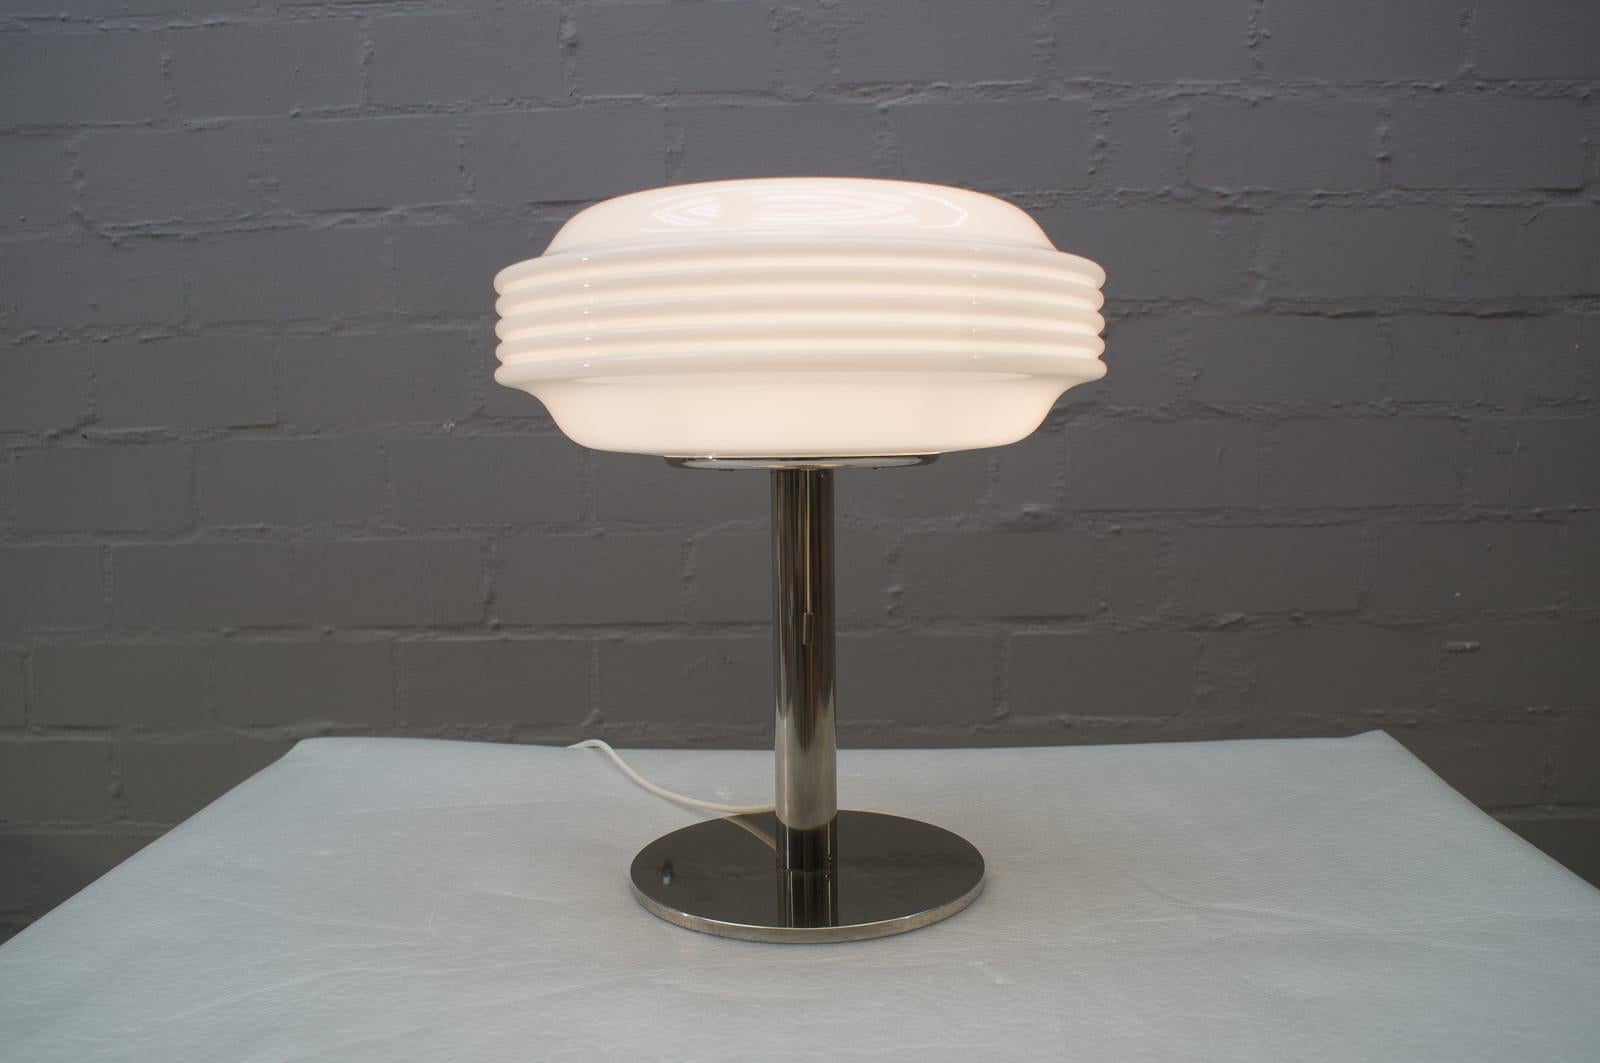 Opaline Glass Lovely Space Age Table Lamp by Temde Leuchten, Switzerland, 1970s For Sale